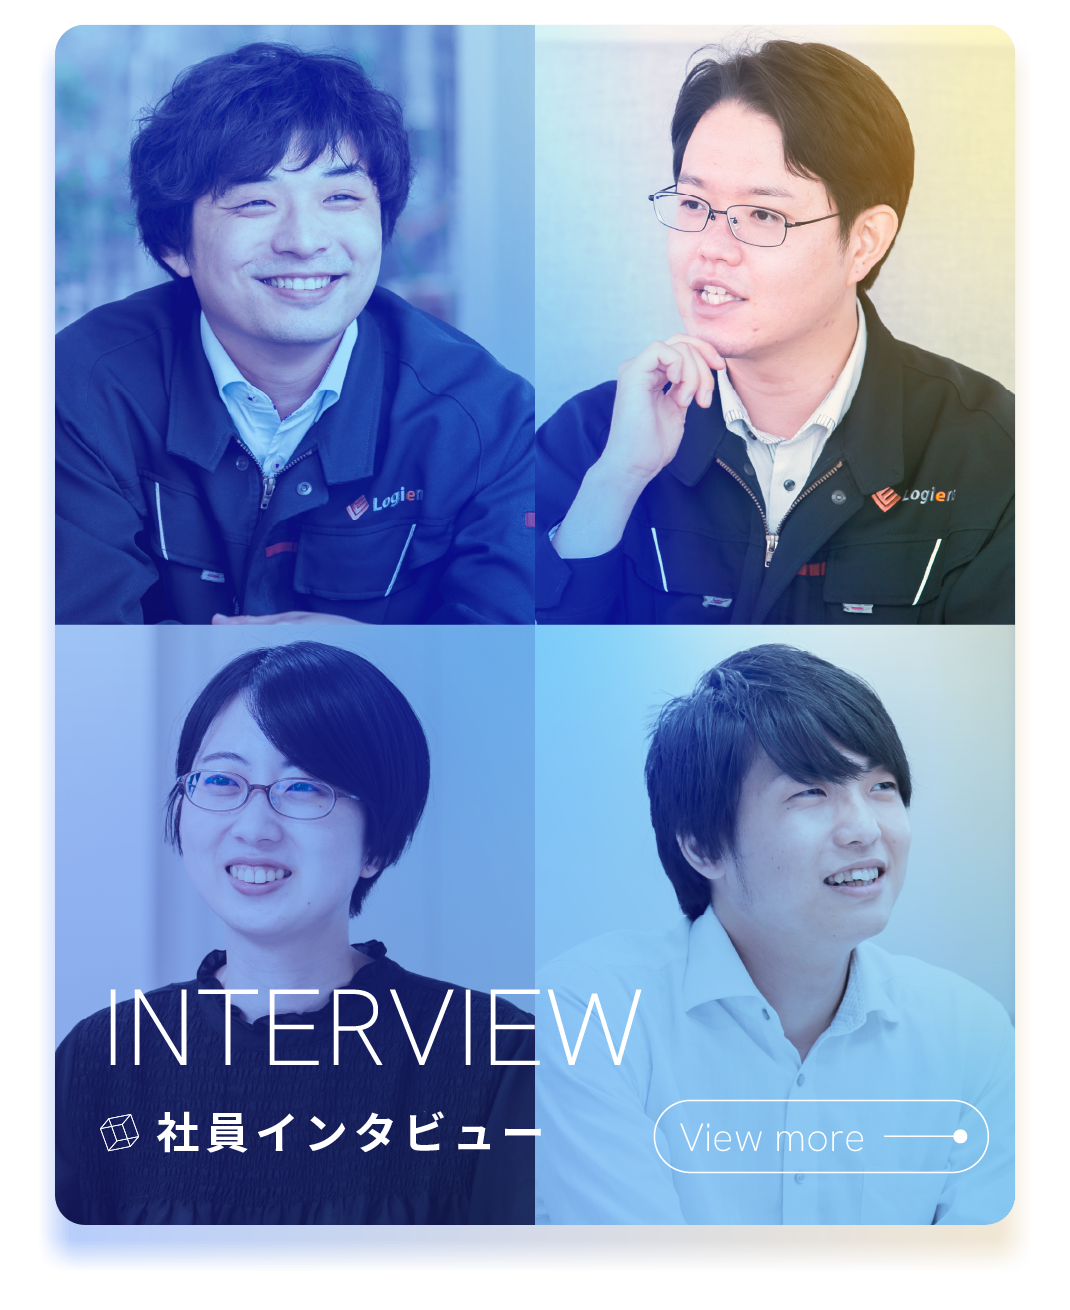 INTERVIEW / 社員インタビュー / View more